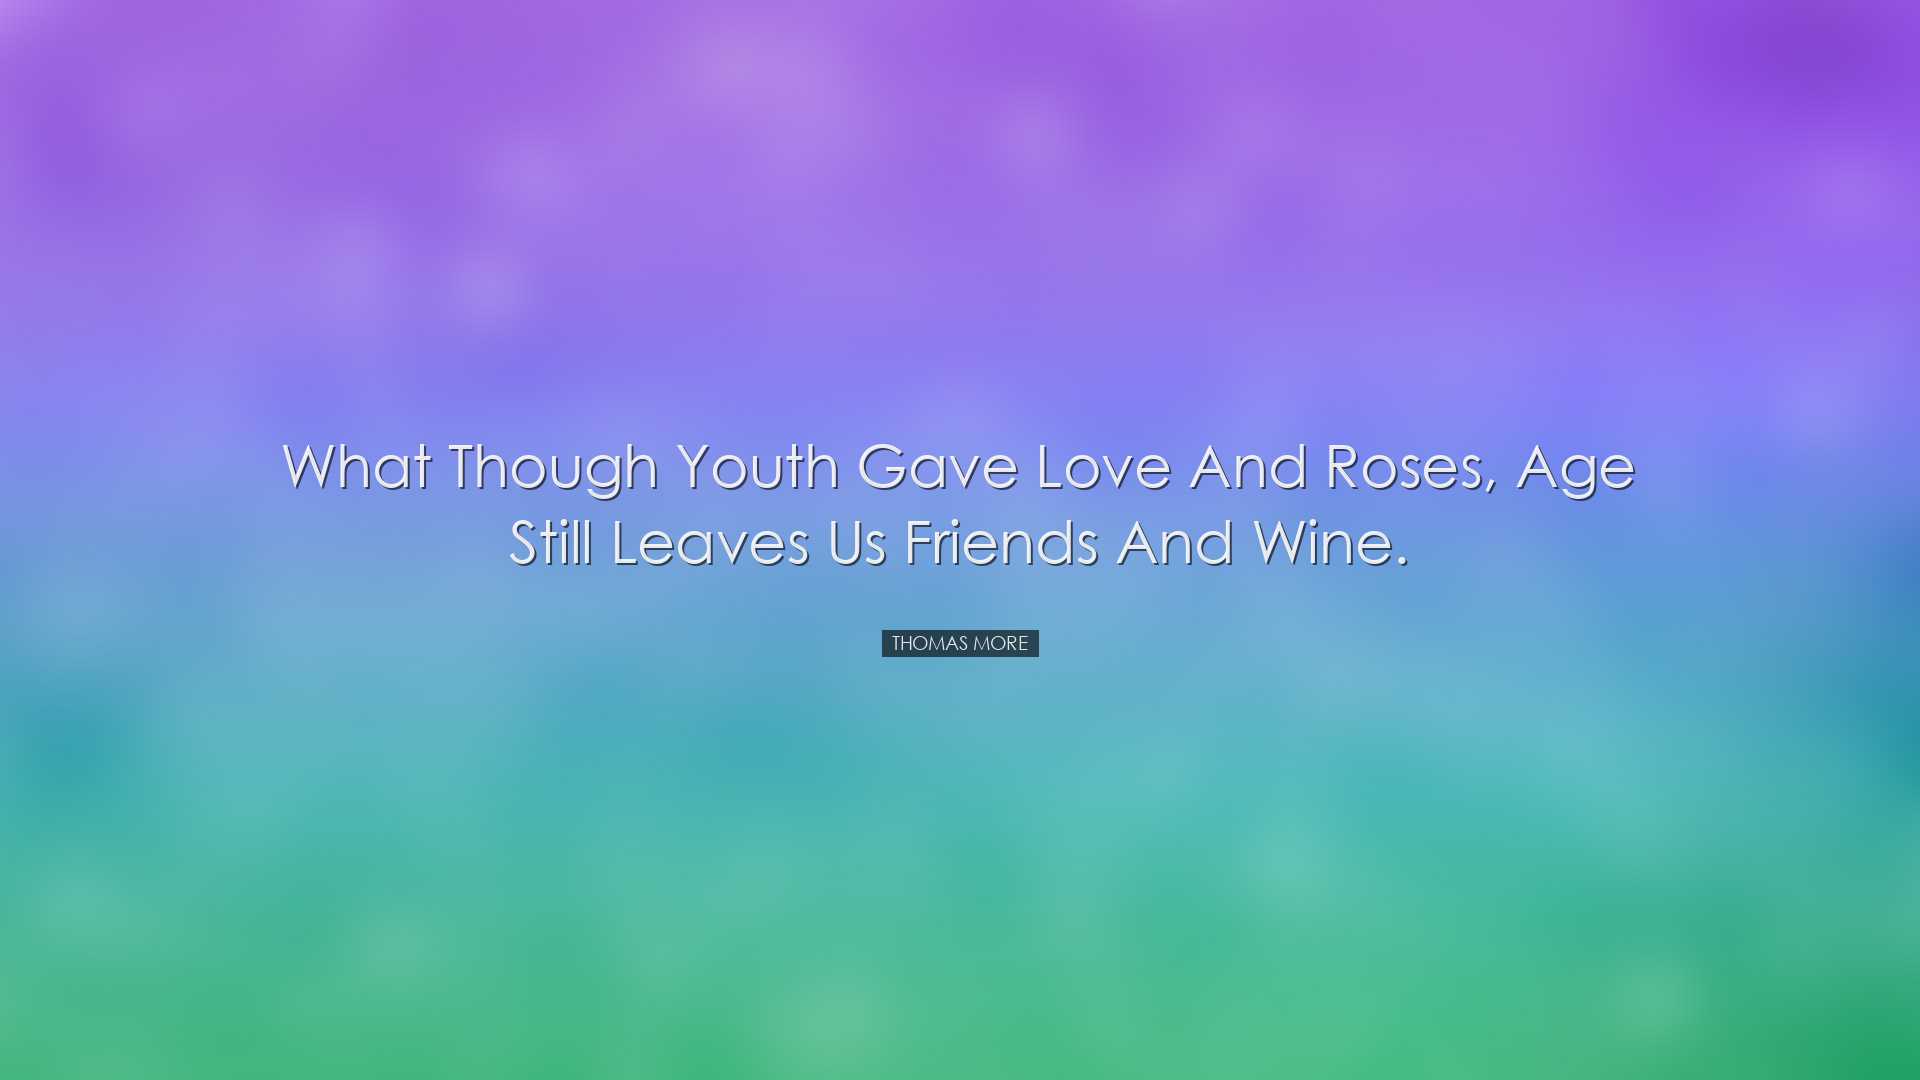 What though youth gave love and roses, Age still leaves us friends